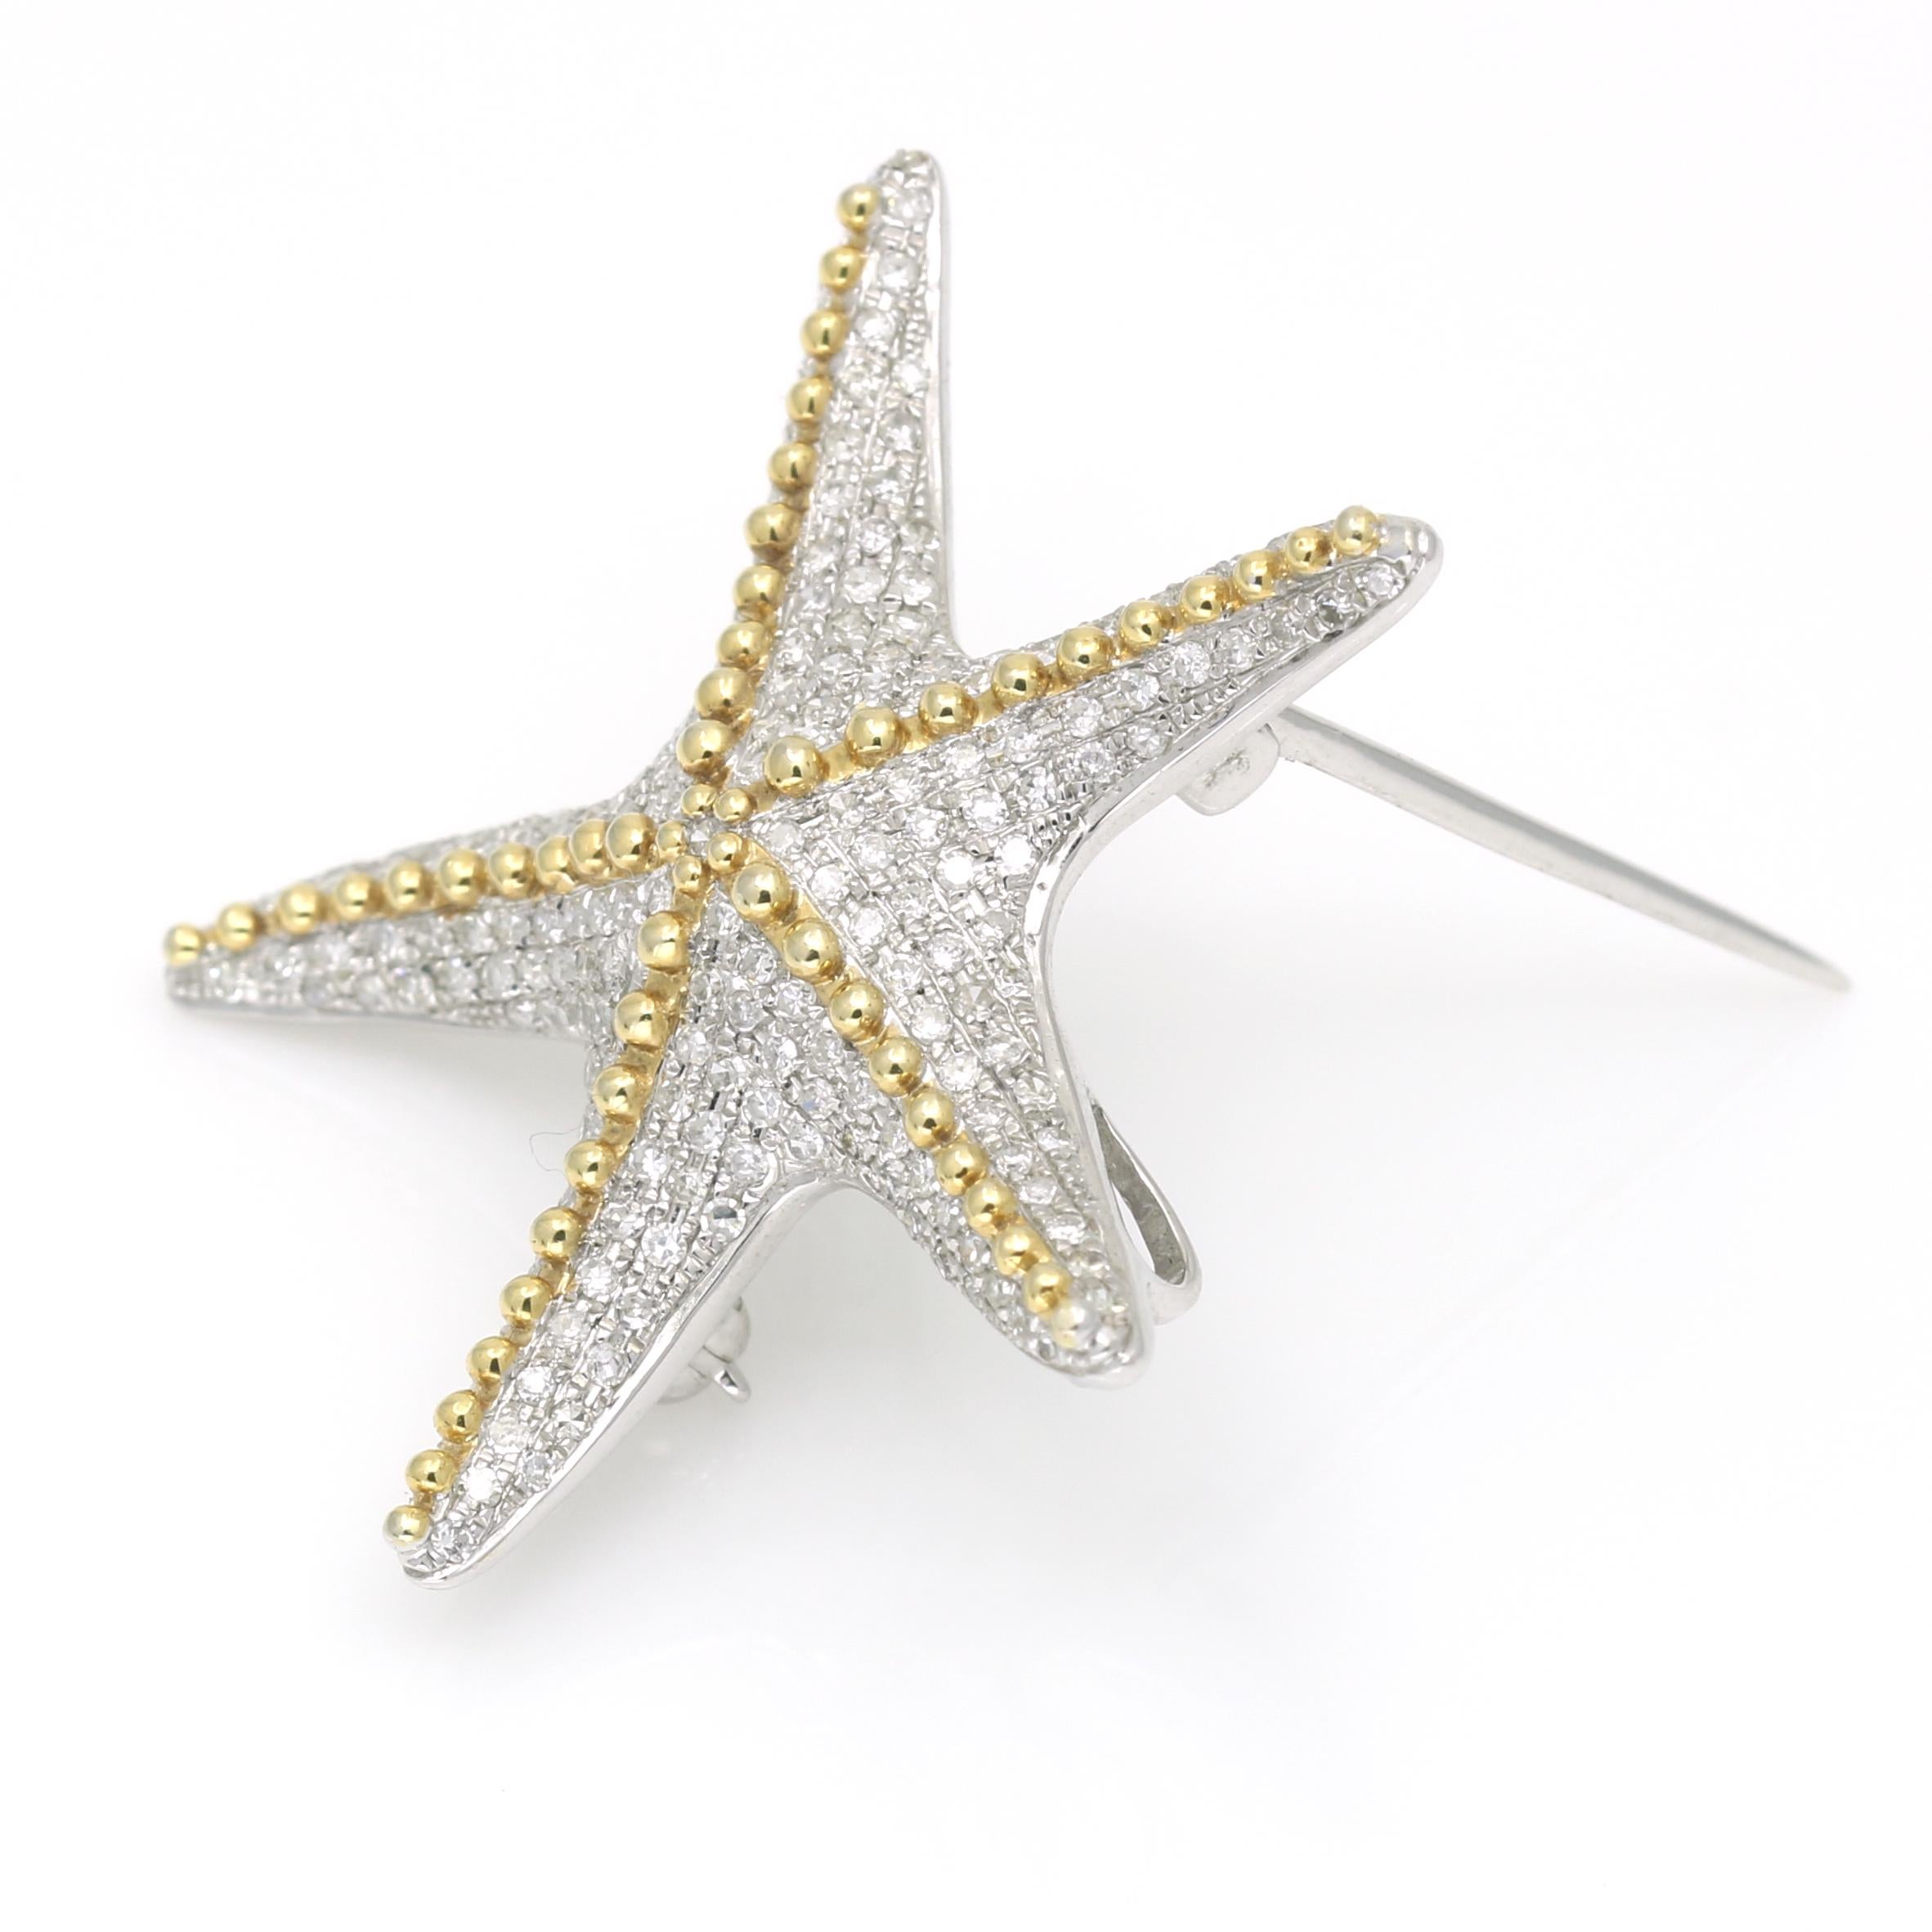 Pave Diamond Starfish Brooch Pendant in 14k Yellow and White Gold In Excellent Condition For Sale In Boca Raton, FL